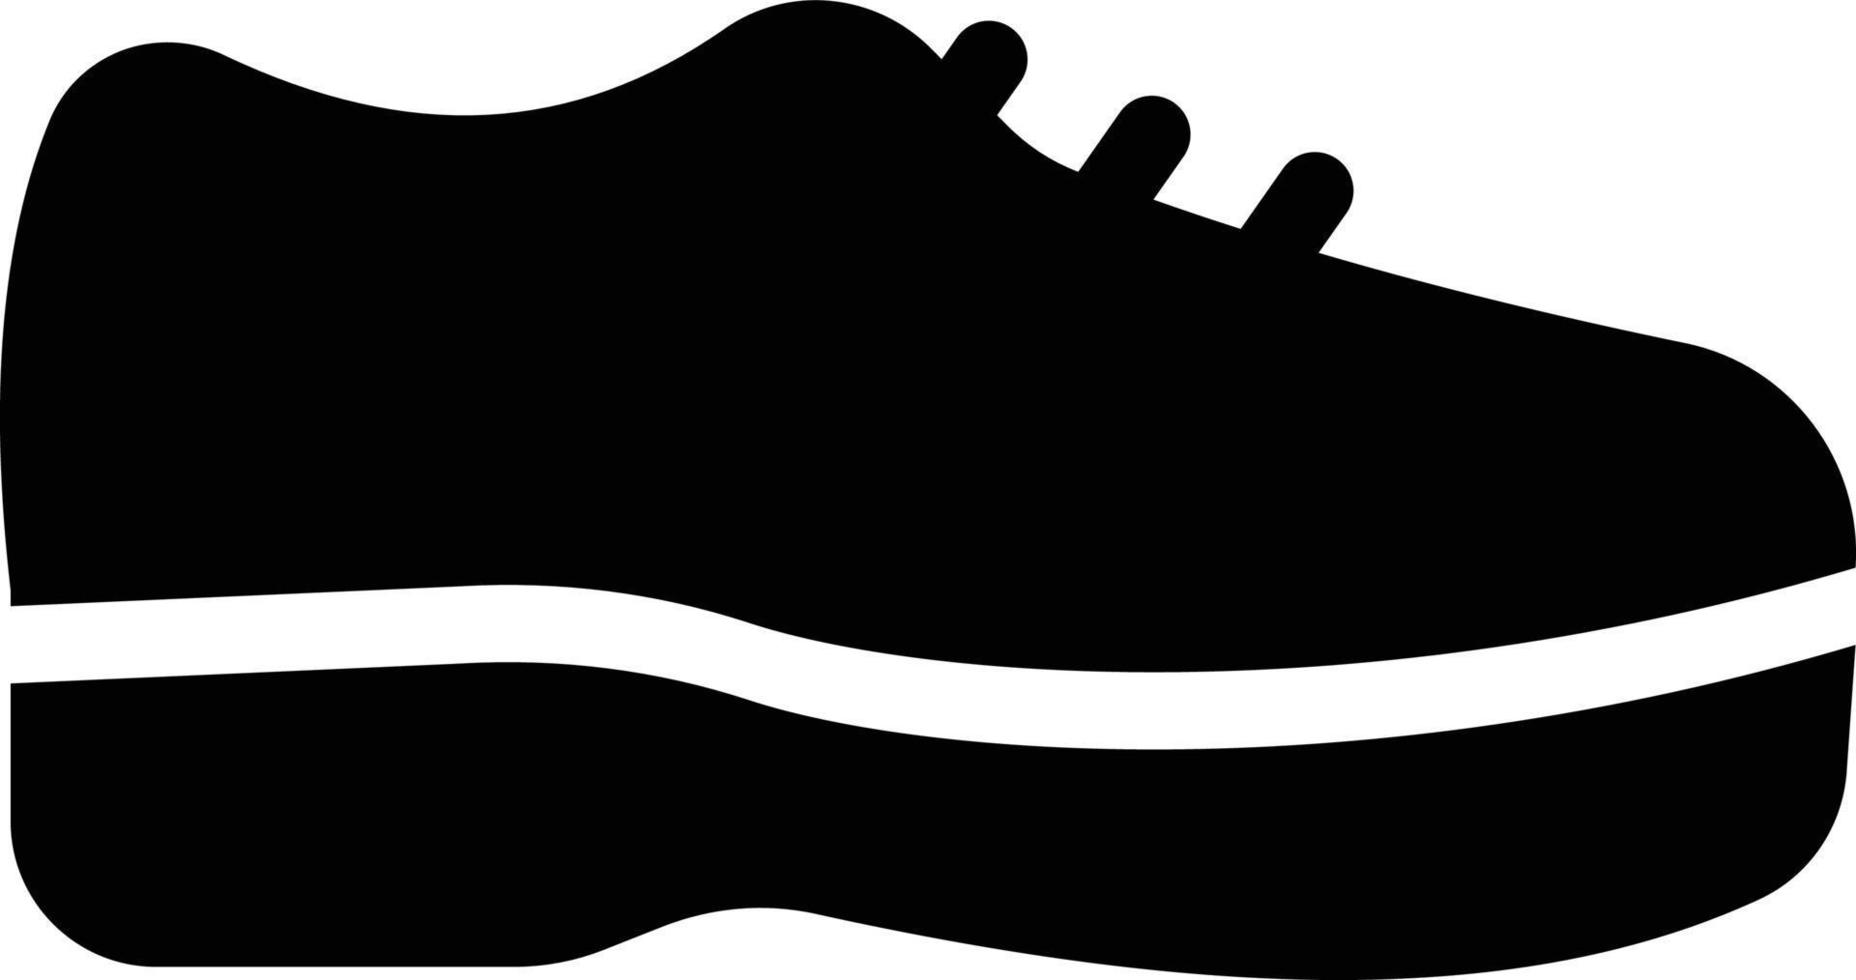 shoes vector illustration on a background.Premium quality symbols.vector icons for concept and graphic design.